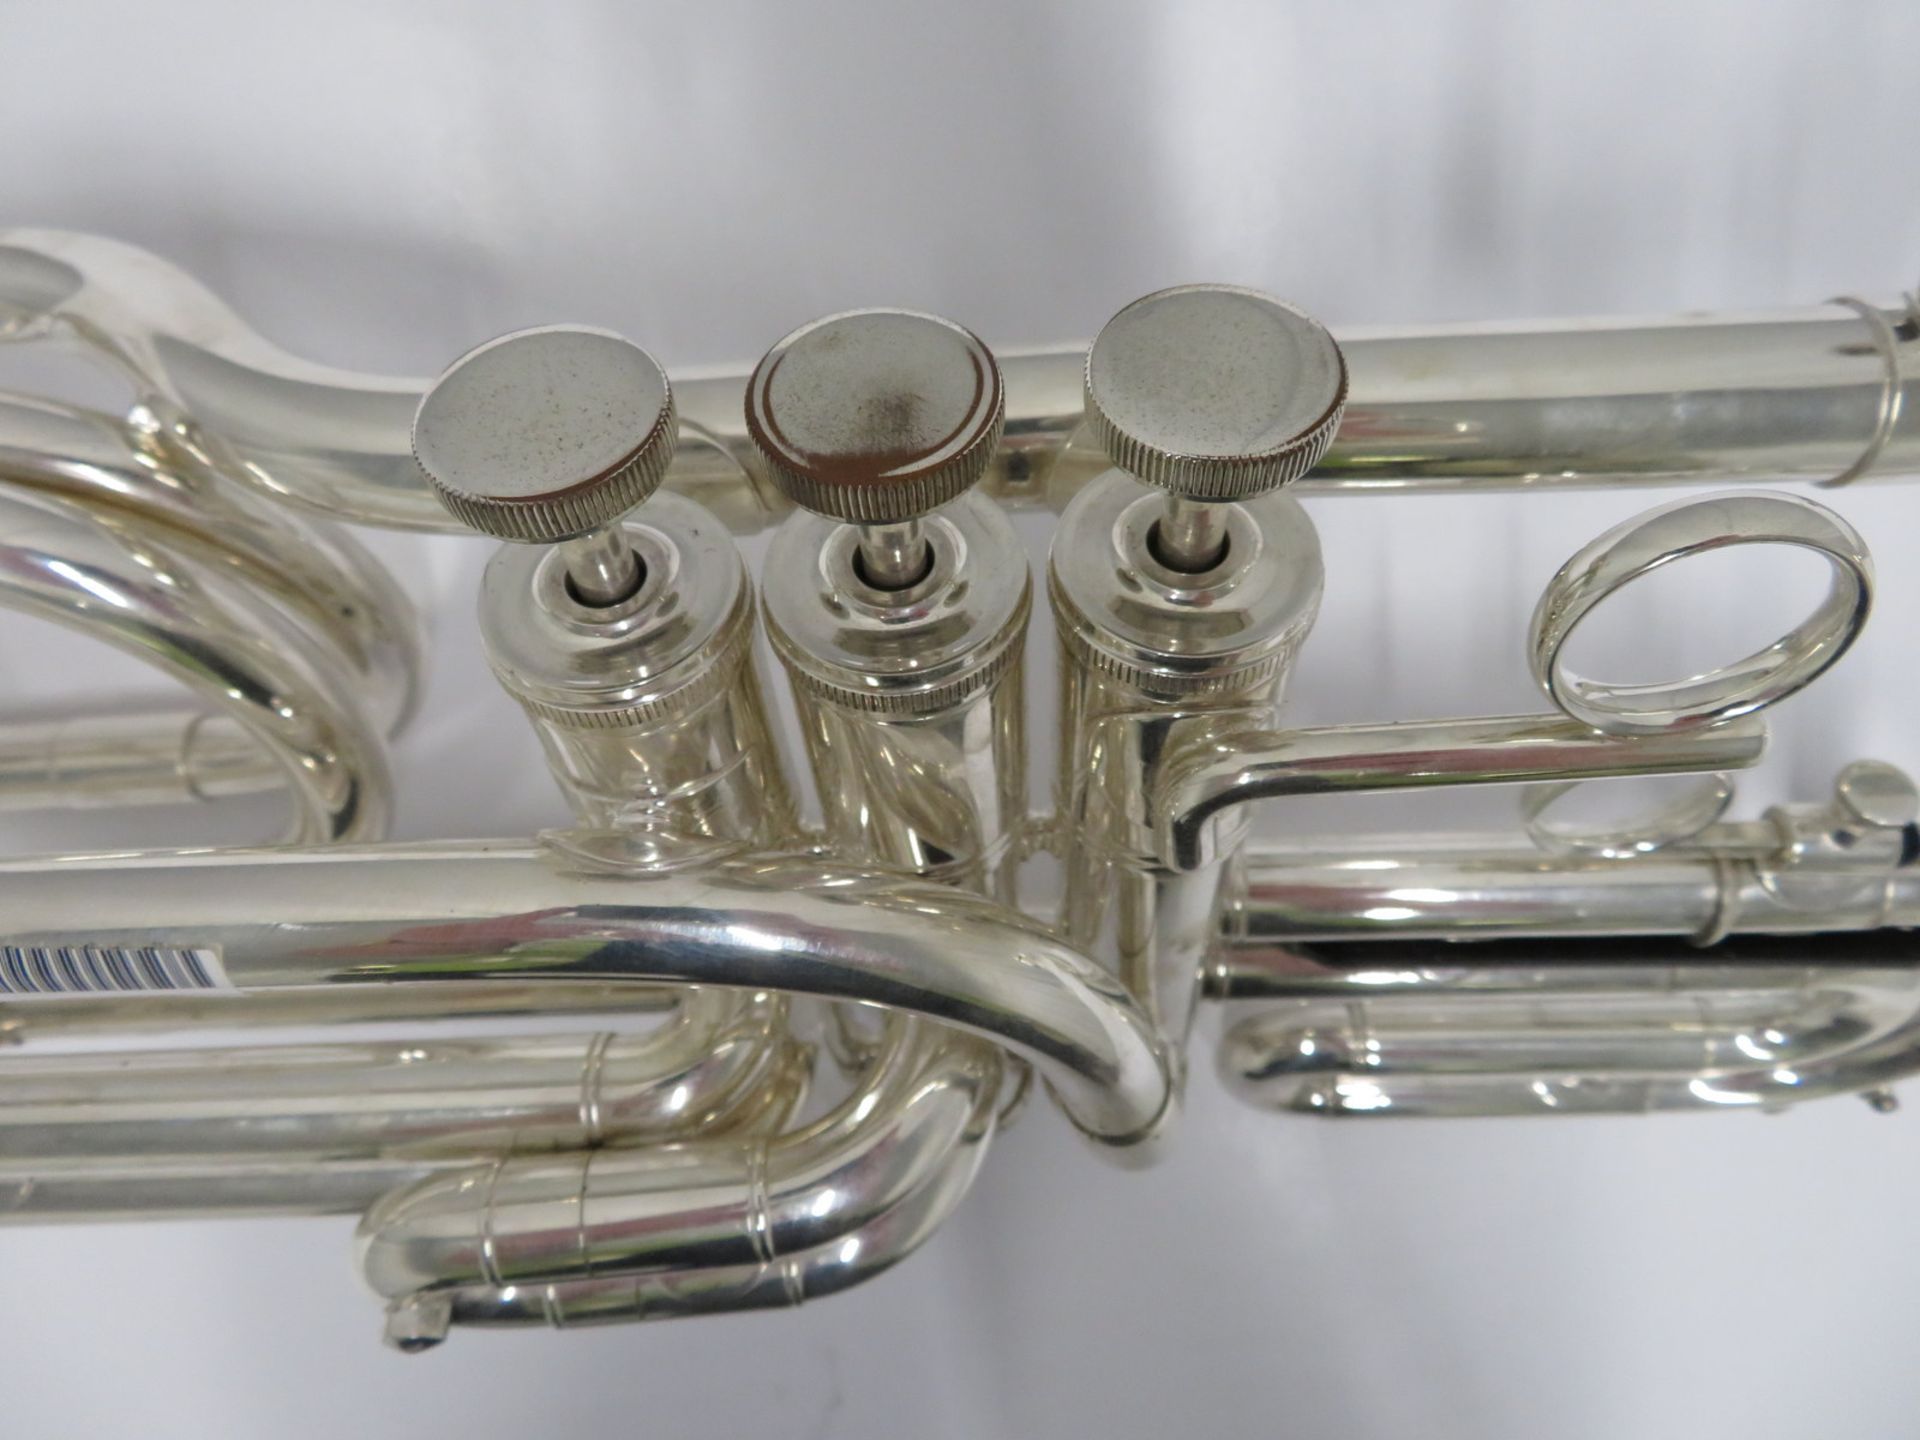 Smith-Watkins fanfare trumpet with case. Serial number: 33104. - Image 6 of 17